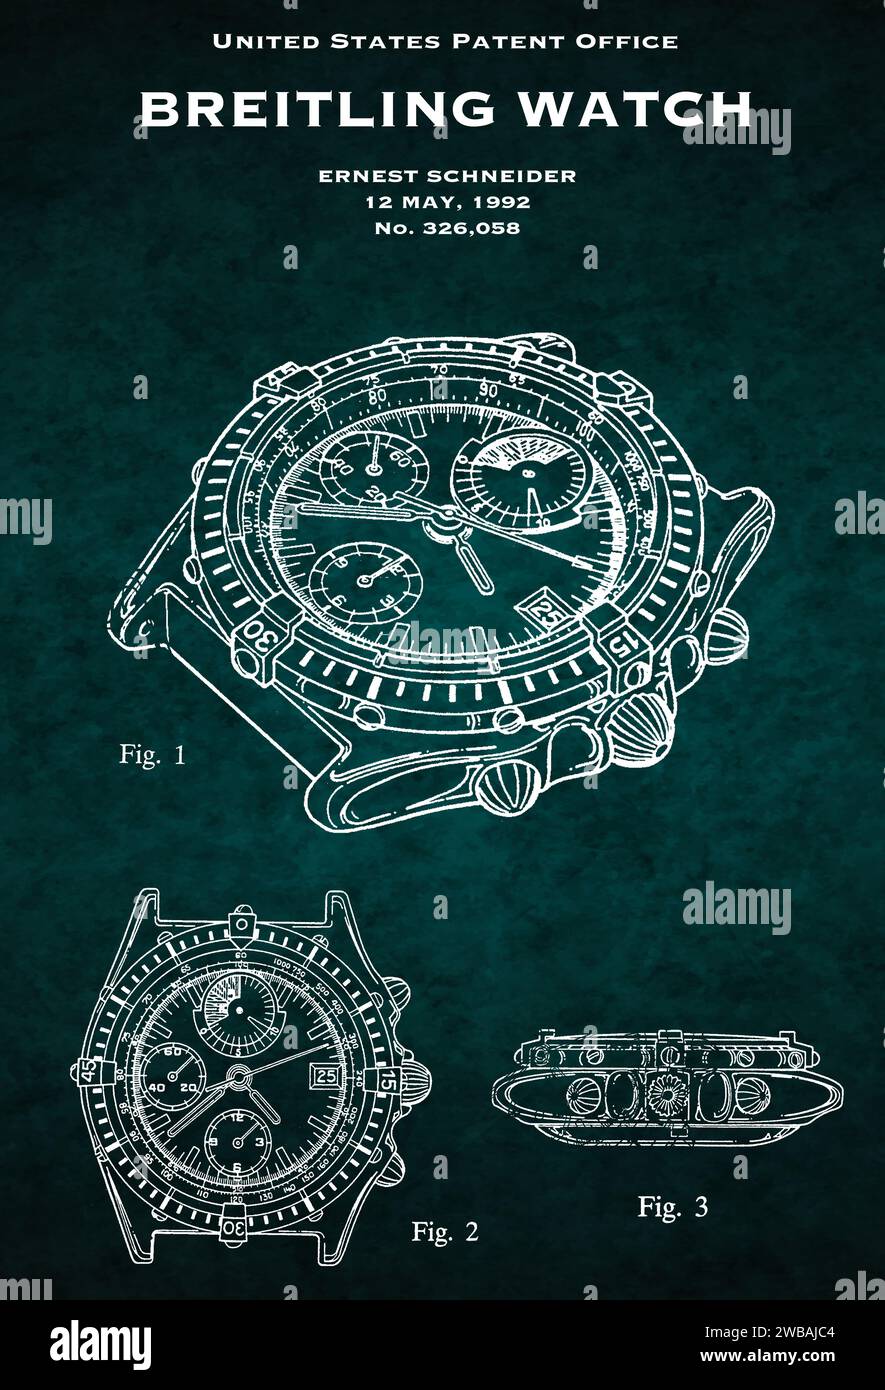 US patent office design from 1992 of a Breitling watch on a green background Stock Photo